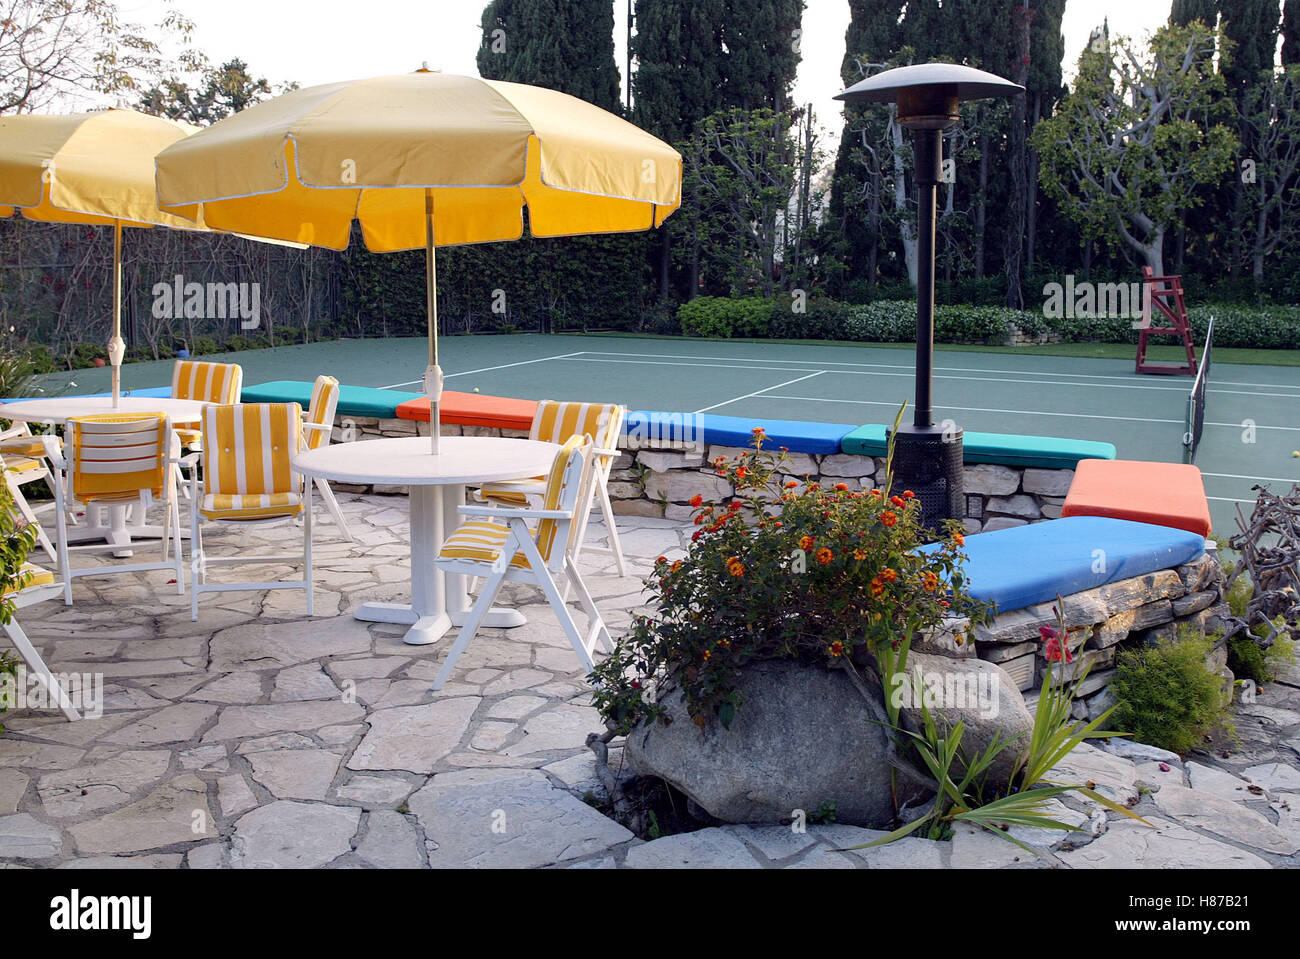 TENNIS COURT PLAYBOY MANSION CATCHES FASHIO PLAYBOY MANSION LOS ANGELES USA 15 May 2003 Stock Photo